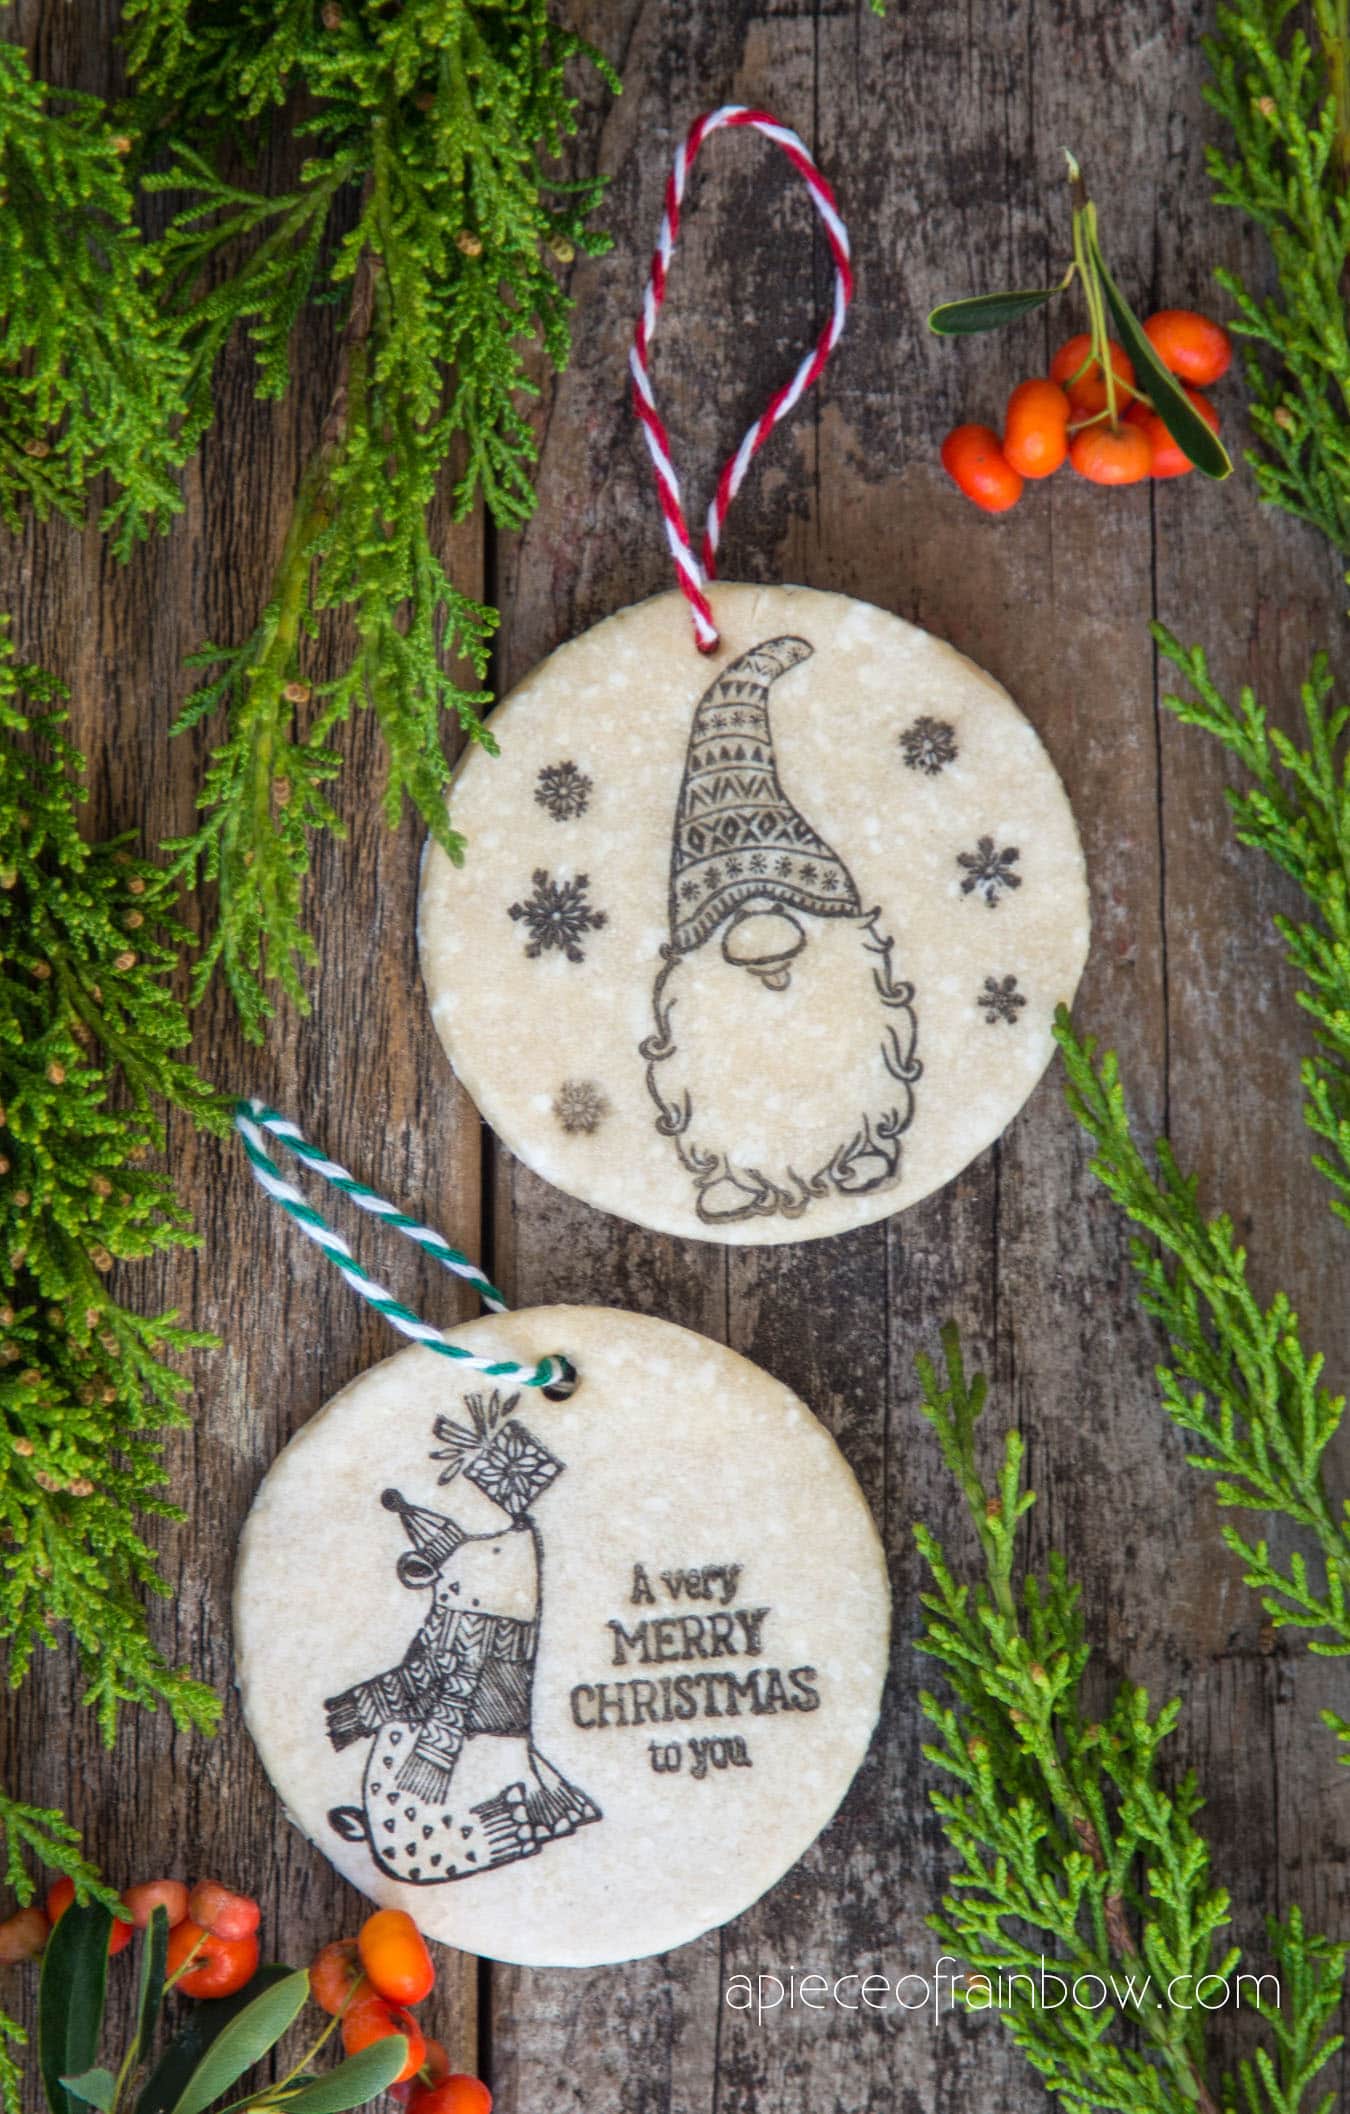 Beautiful vintage farmhouse decorations with salt dough Christmas ornaments & gift tags